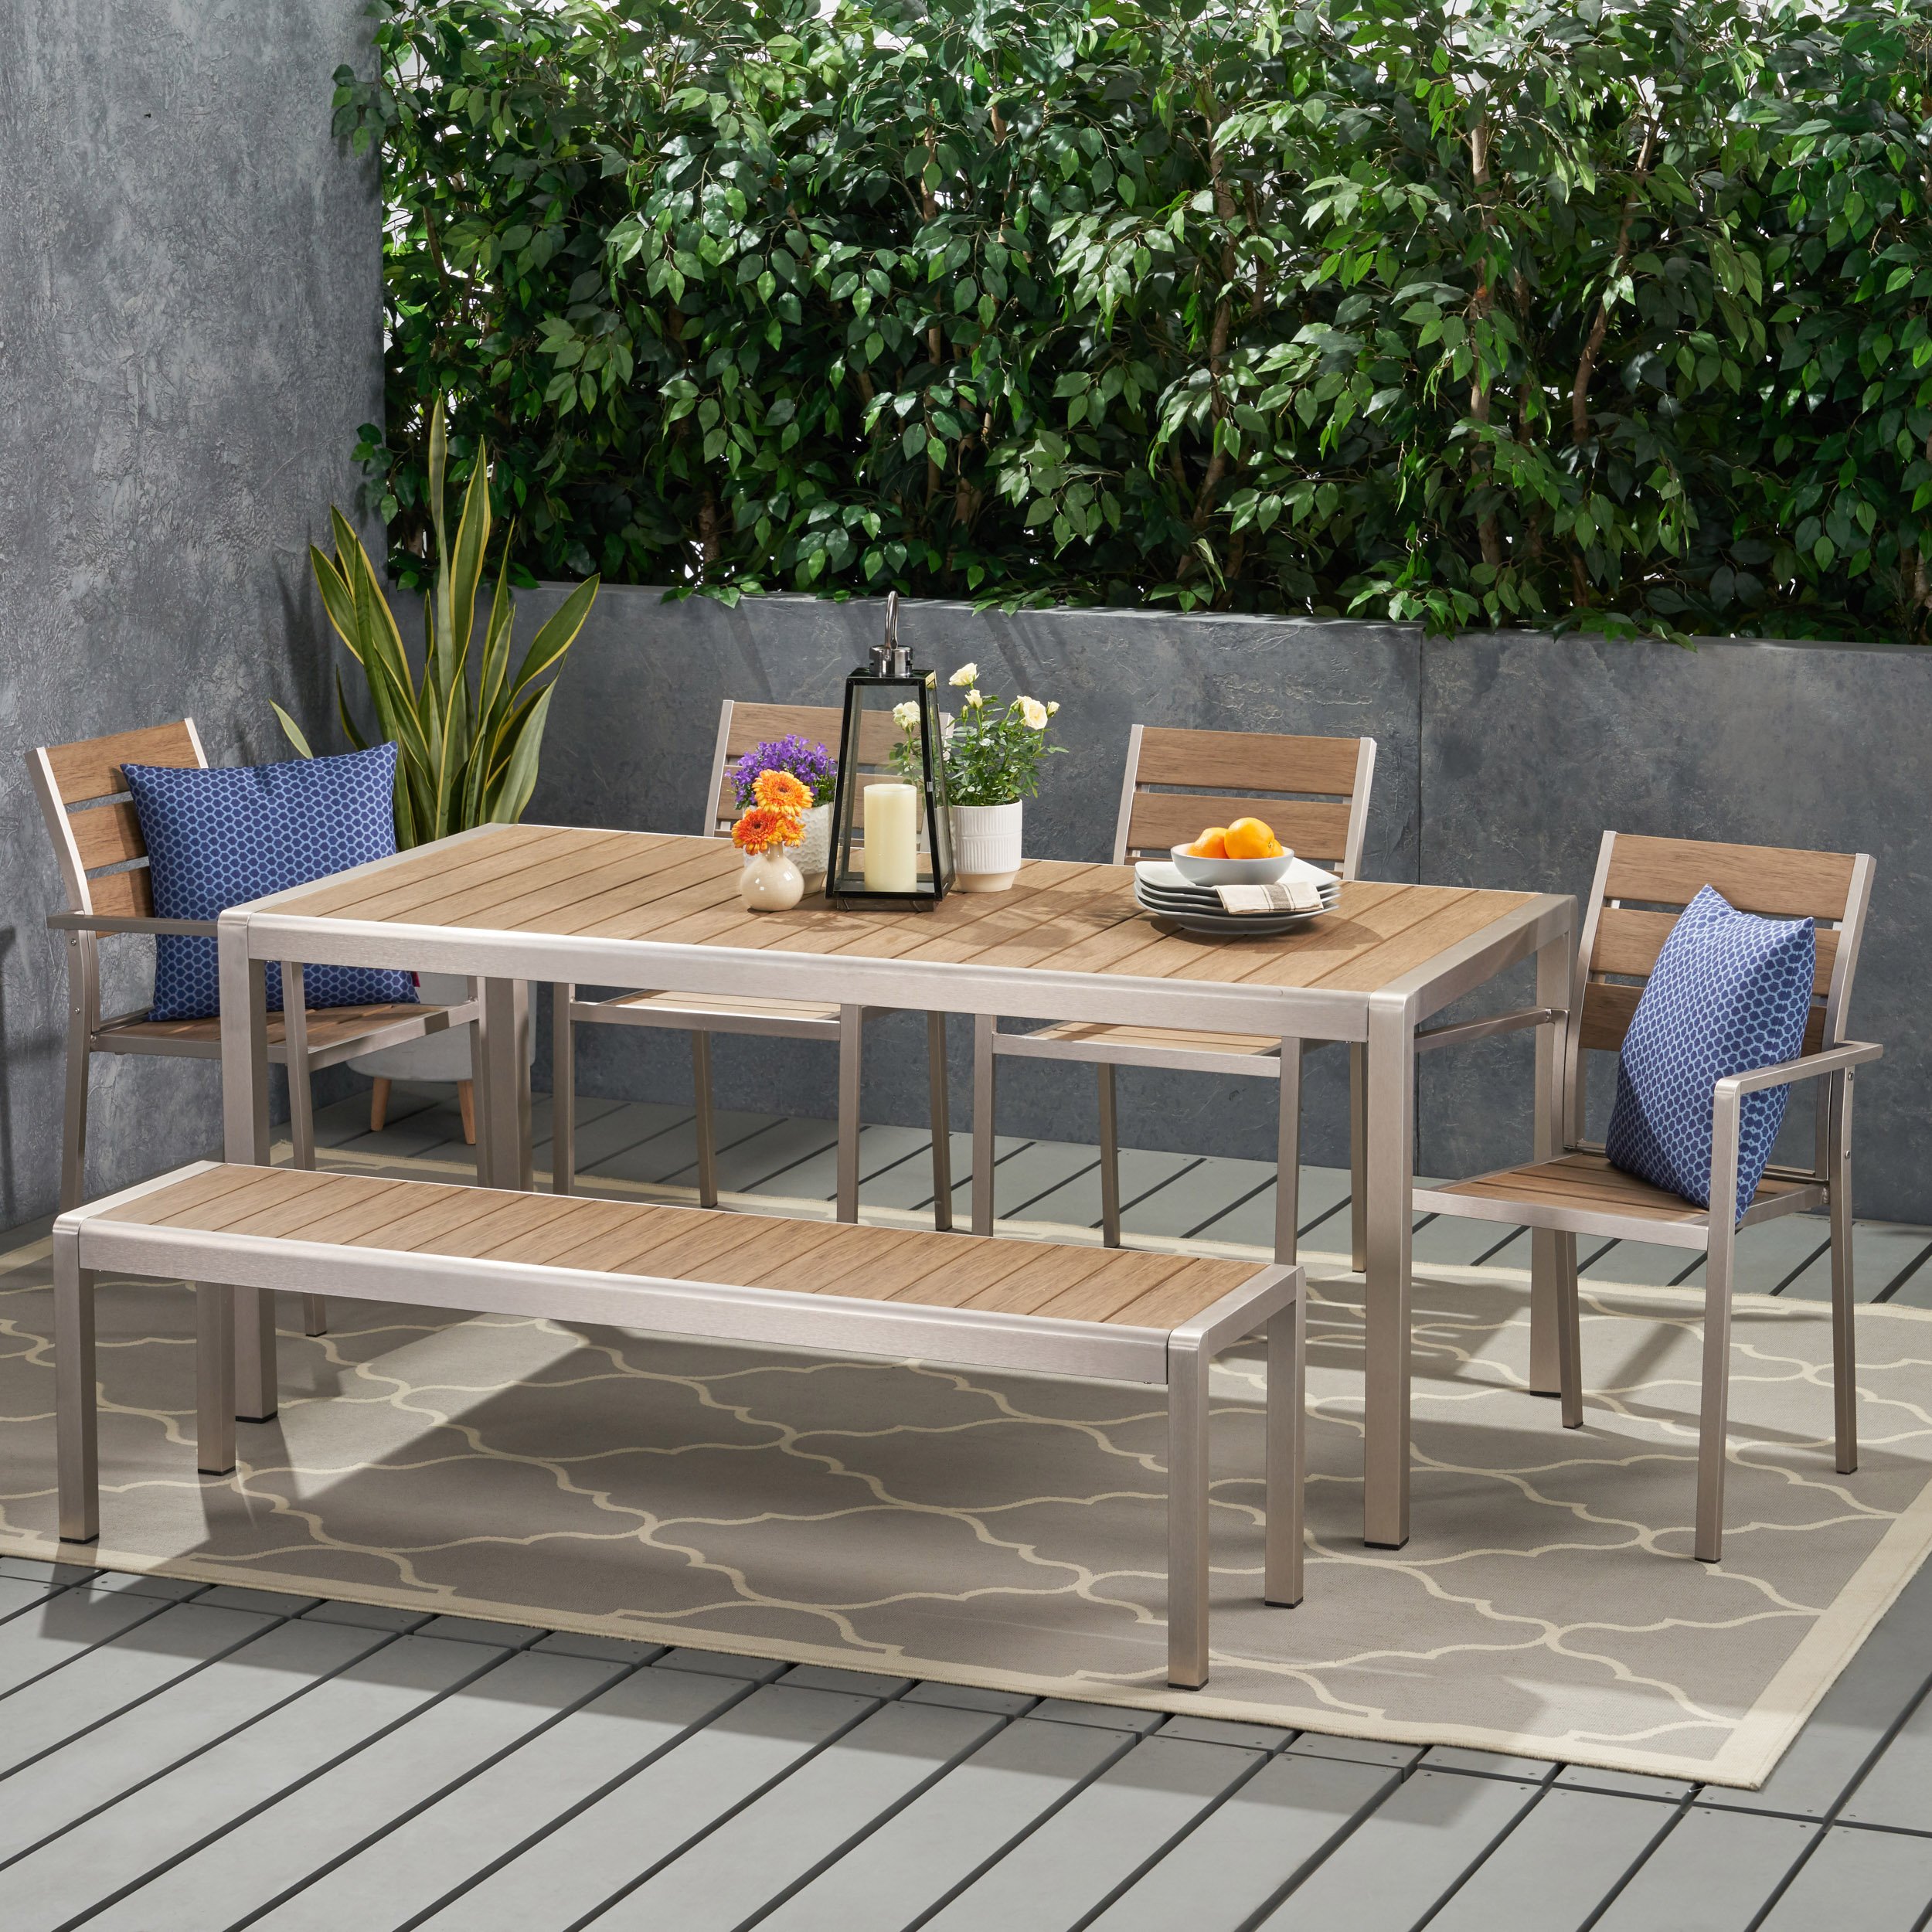 Tess Outdoor Modern Aluminum 6 Seater Dining Set With Dining Bench - Natural Finish + Silver